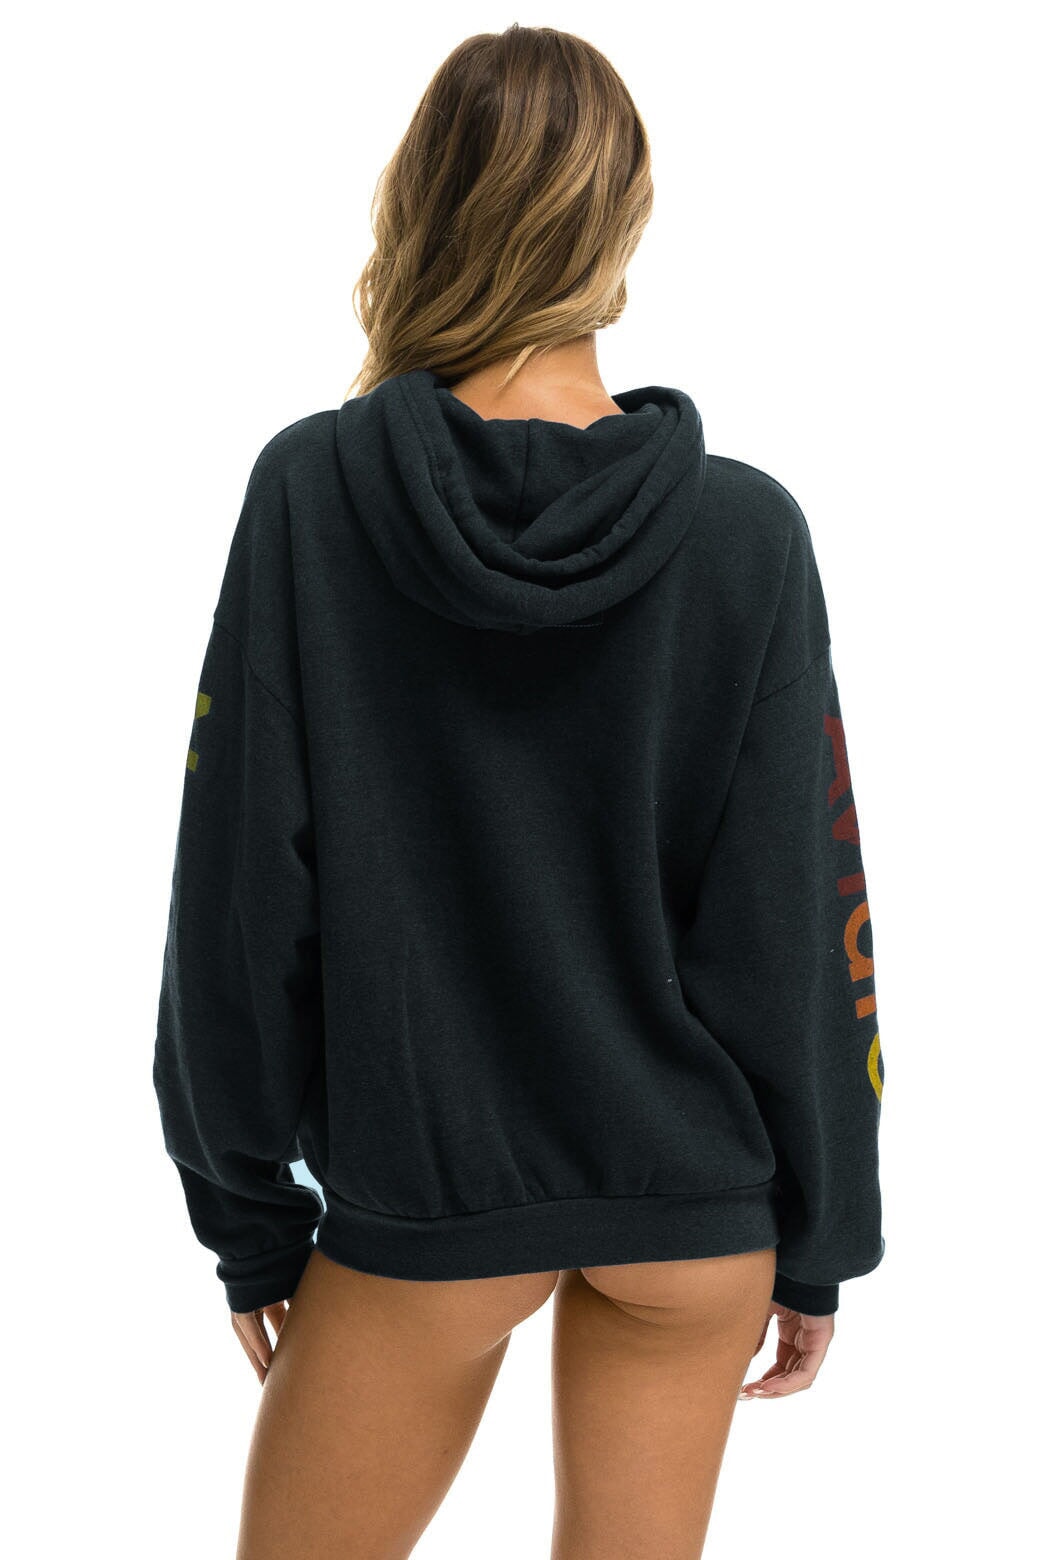 AVIATOR NATION AUSTIN RELAXED PULLOVER HOODIE - CHARCOAL Hoodie Aviator Nation 